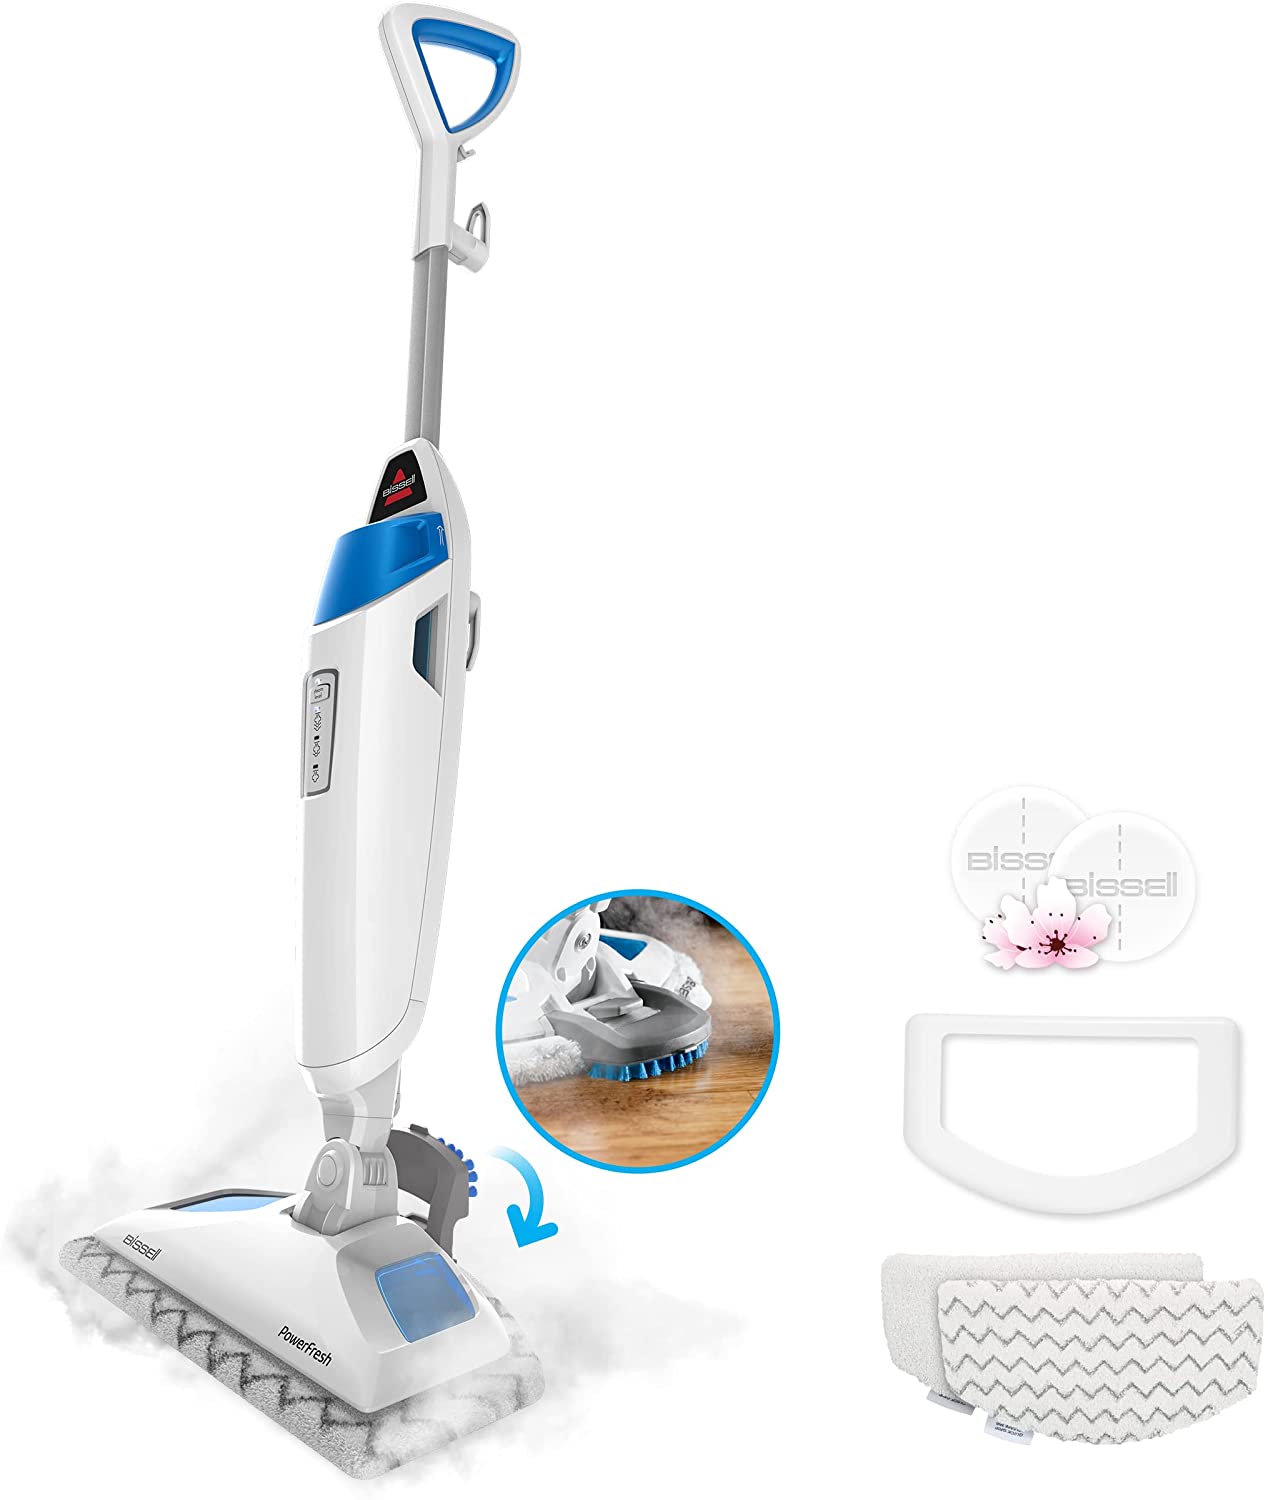 Review of Bissell Power Fresh Steam Mop with Natural Sanitization, 1940A